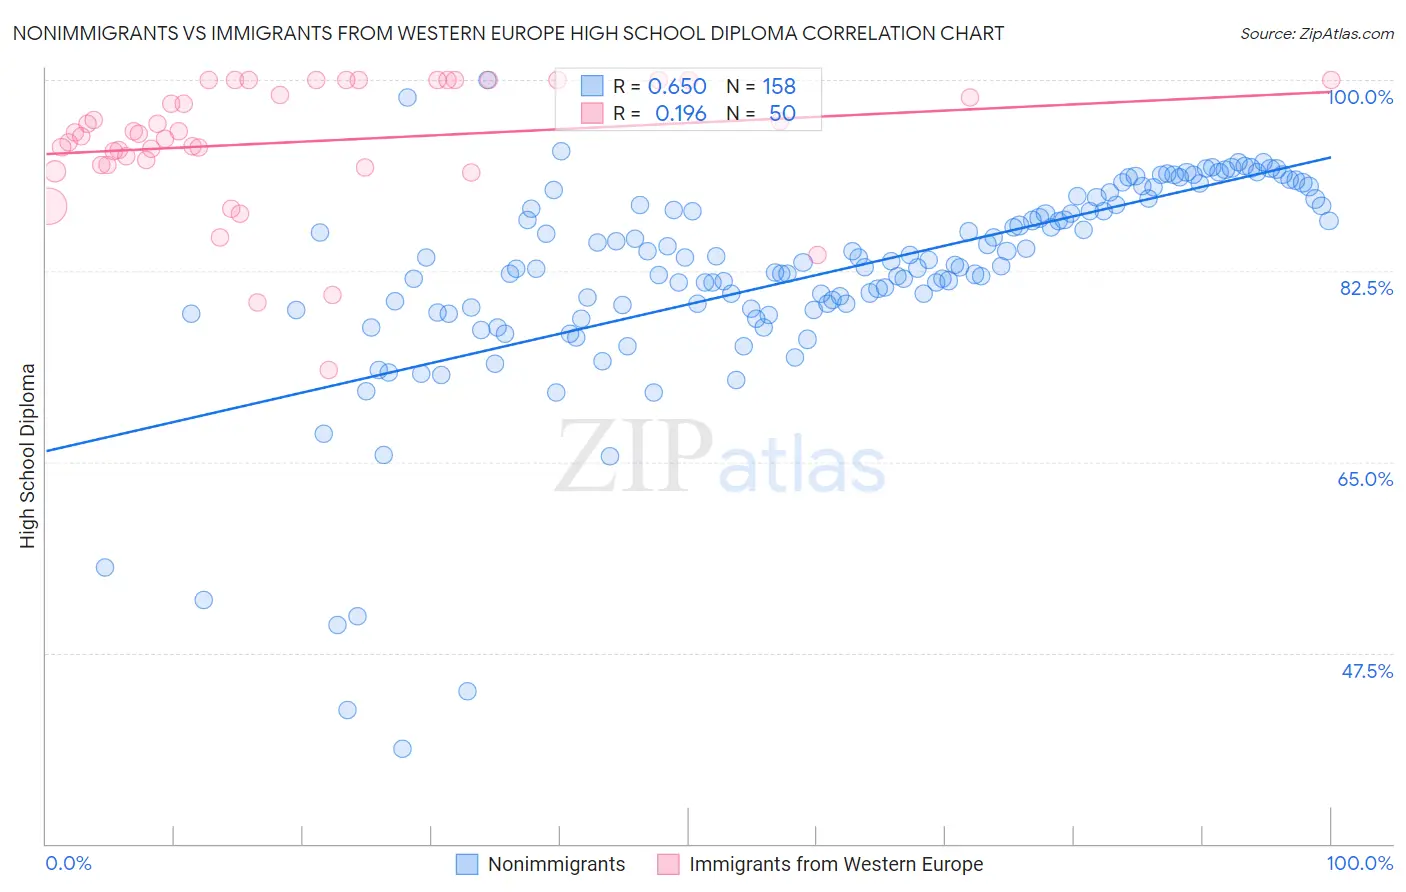 Nonimmigrants vs Immigrants from Western Europe High School Diploma